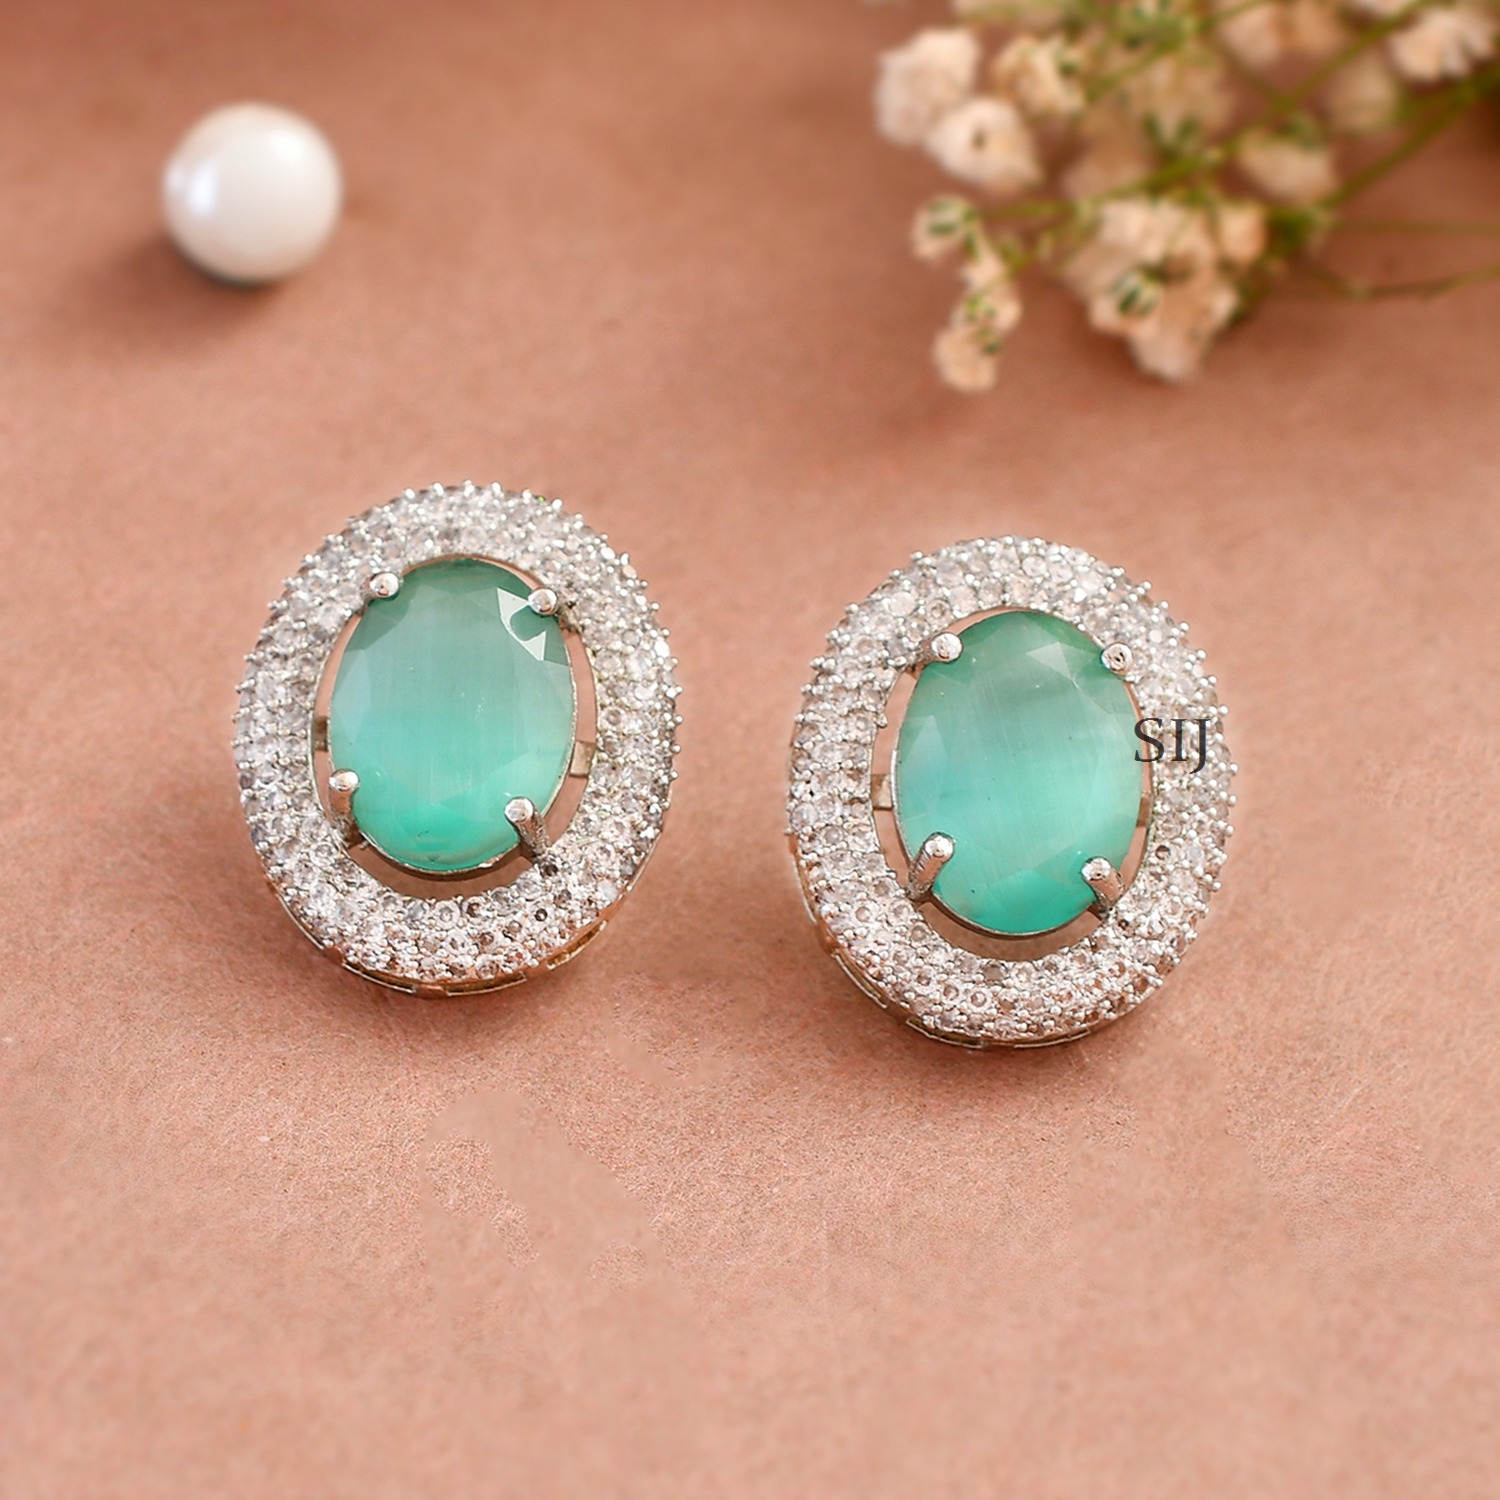 Silver-Plated AD Studded Mint Contemporary Stud Earrings